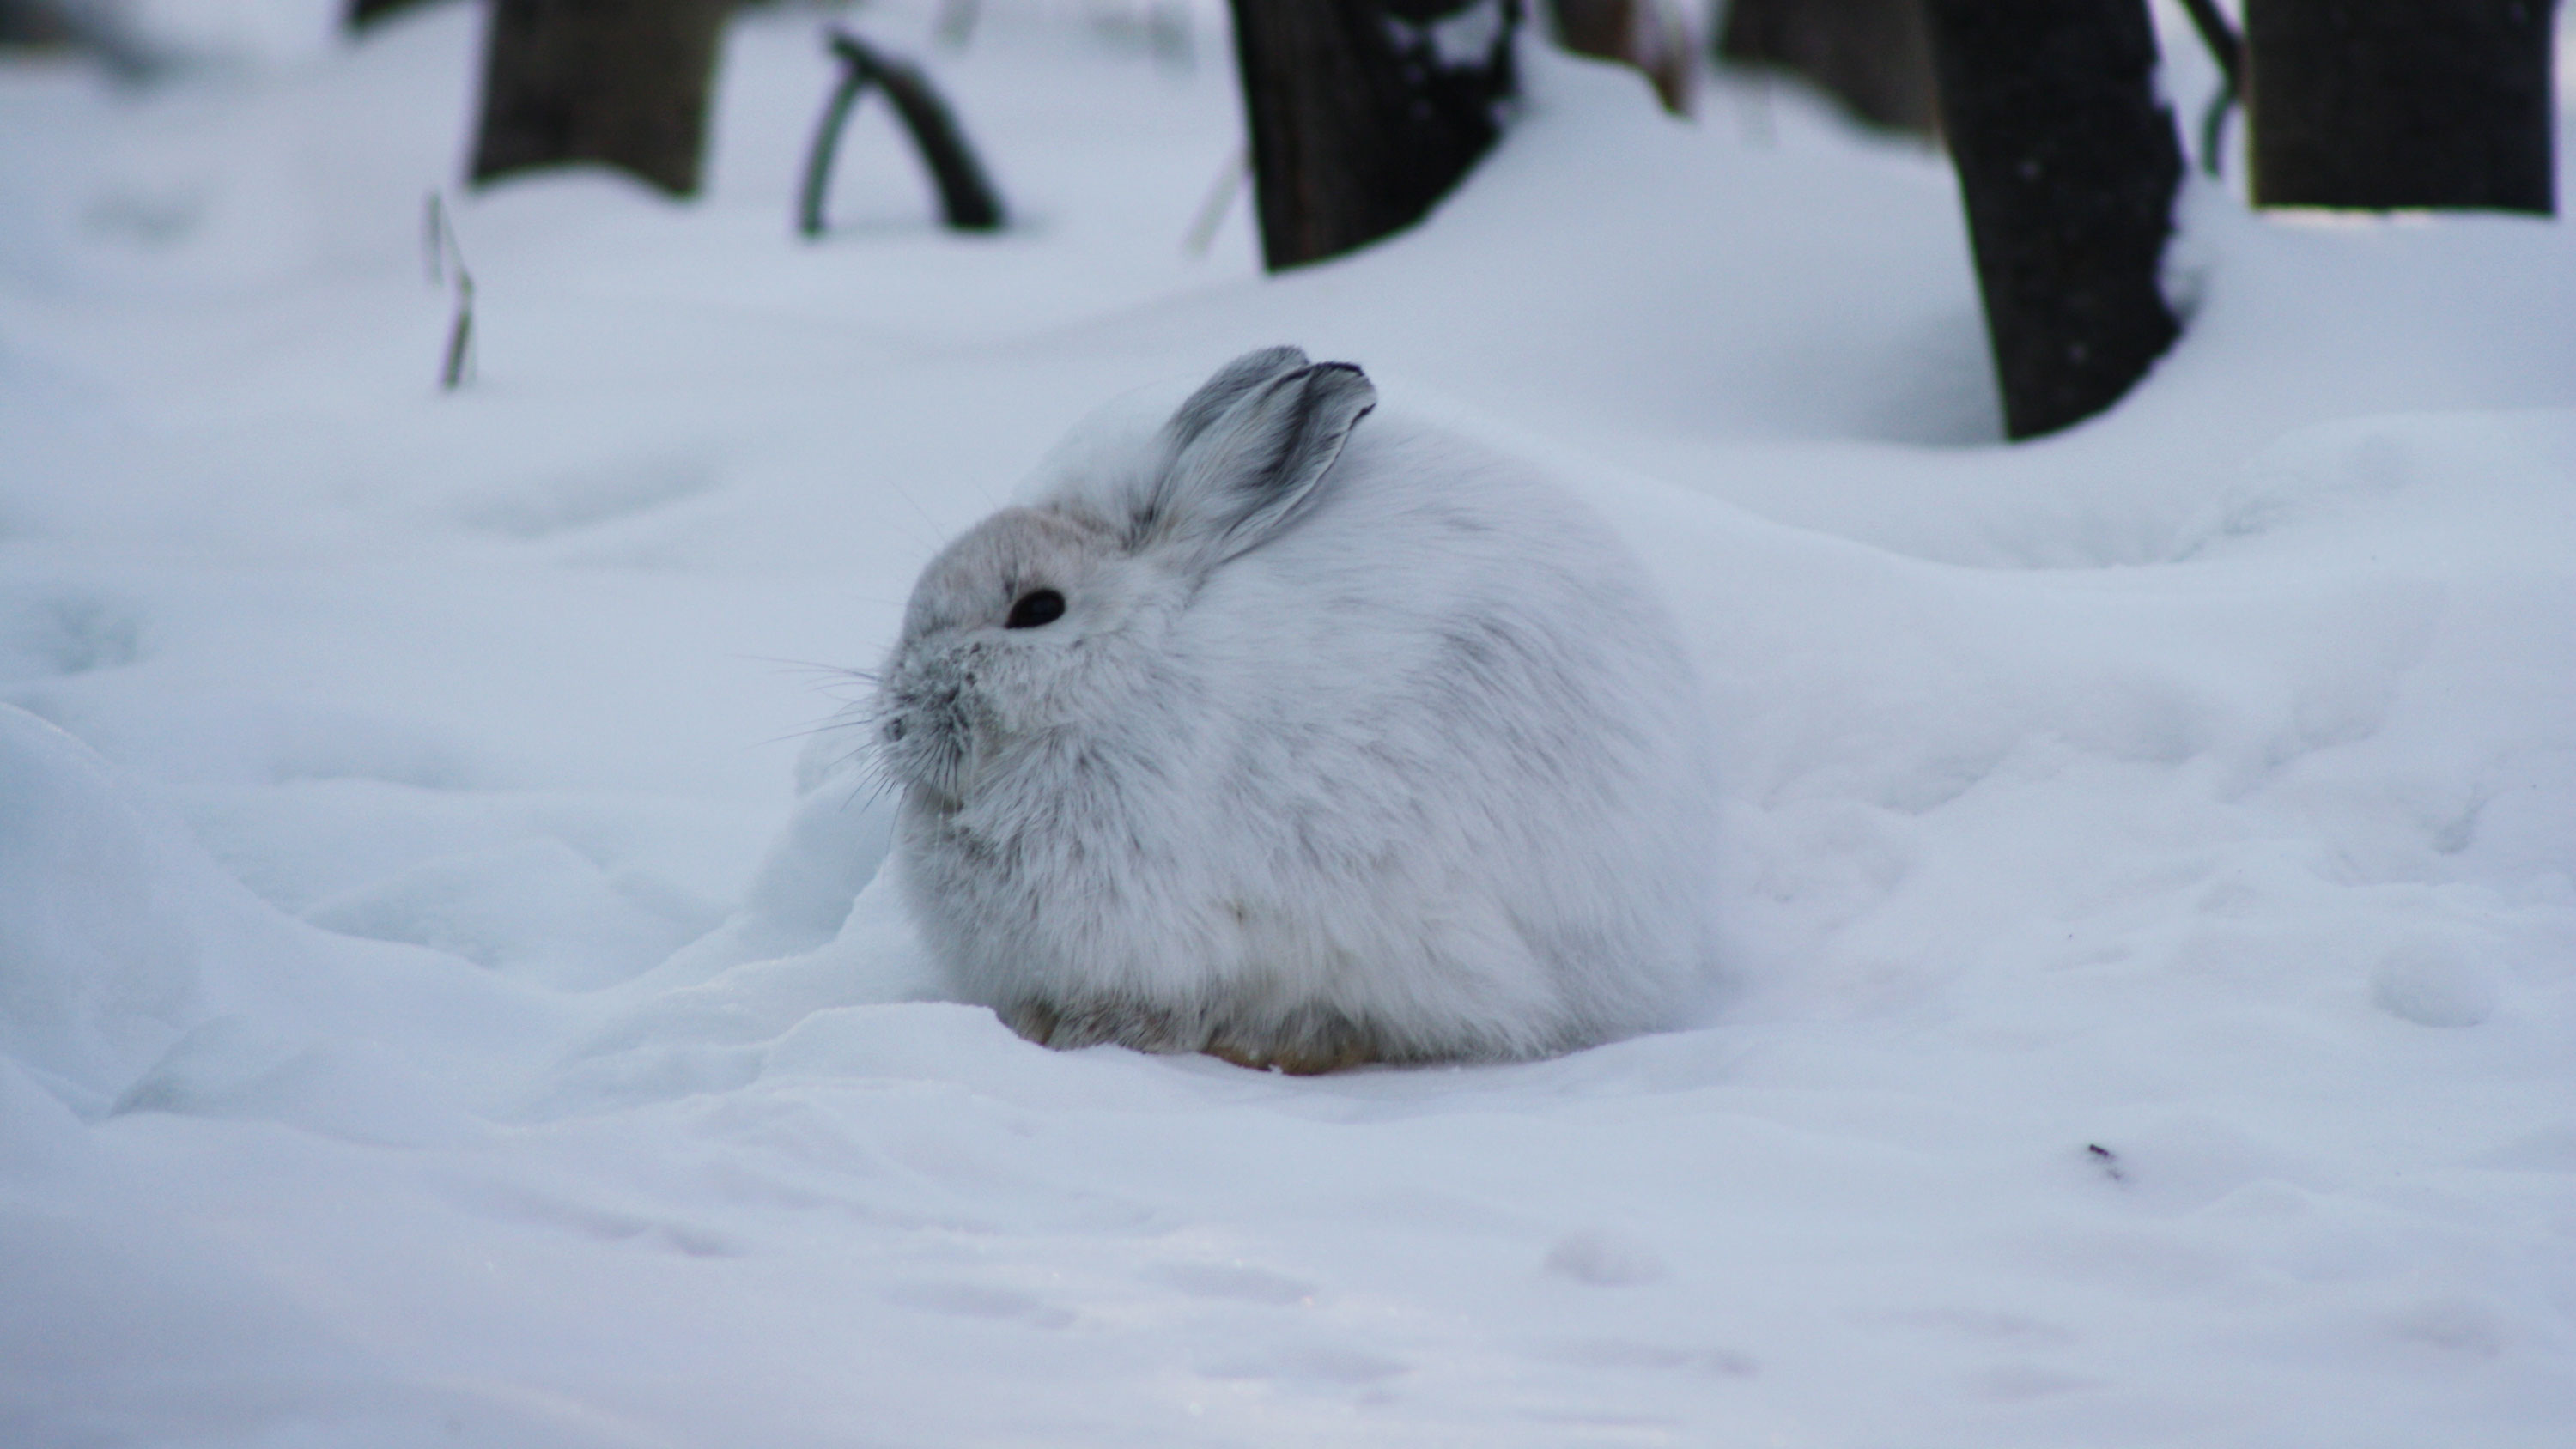 A snowshoe hare resting during a cold winter day